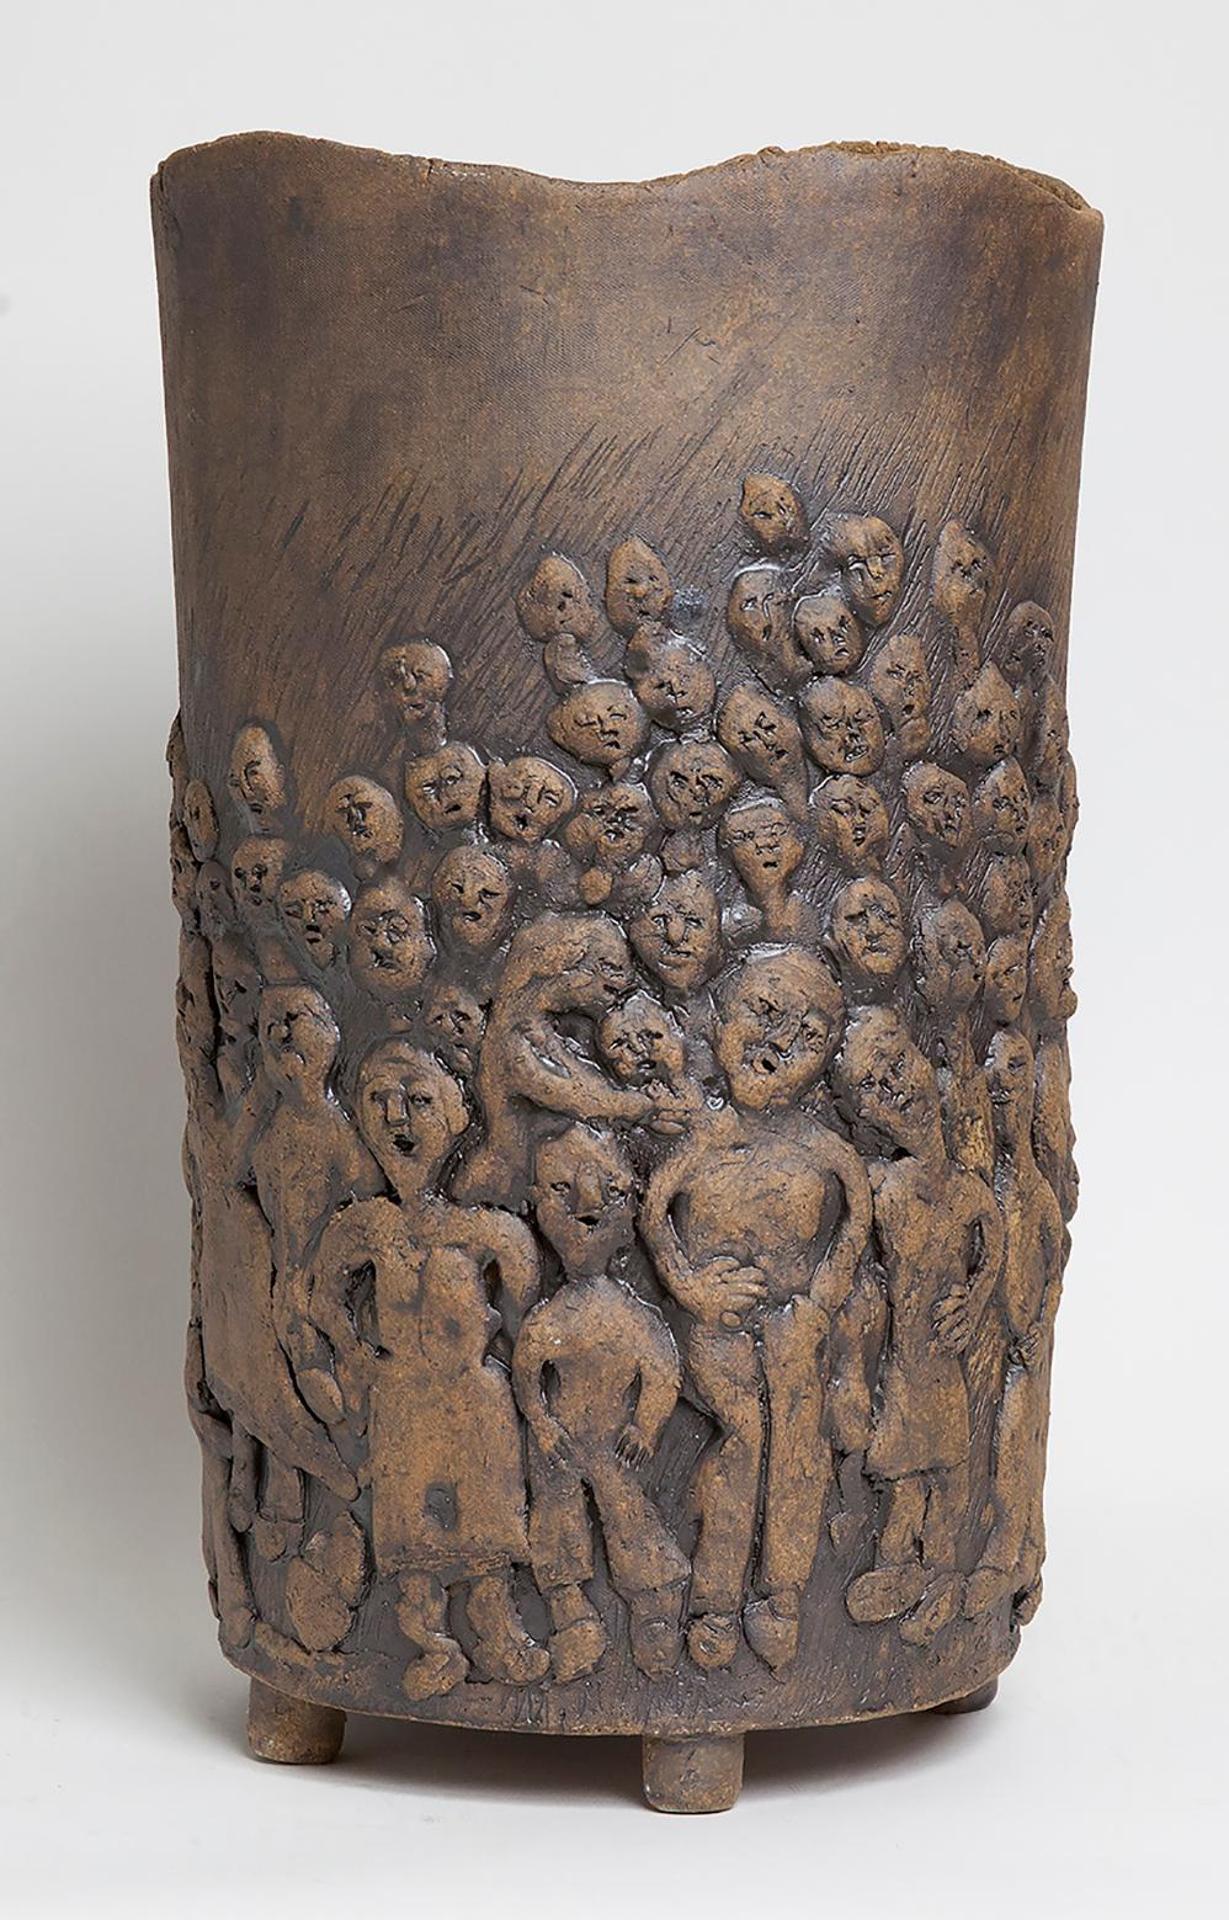 Maria Gakovic (1913-1999) - Untitled- Tall Upright Container with People Motif